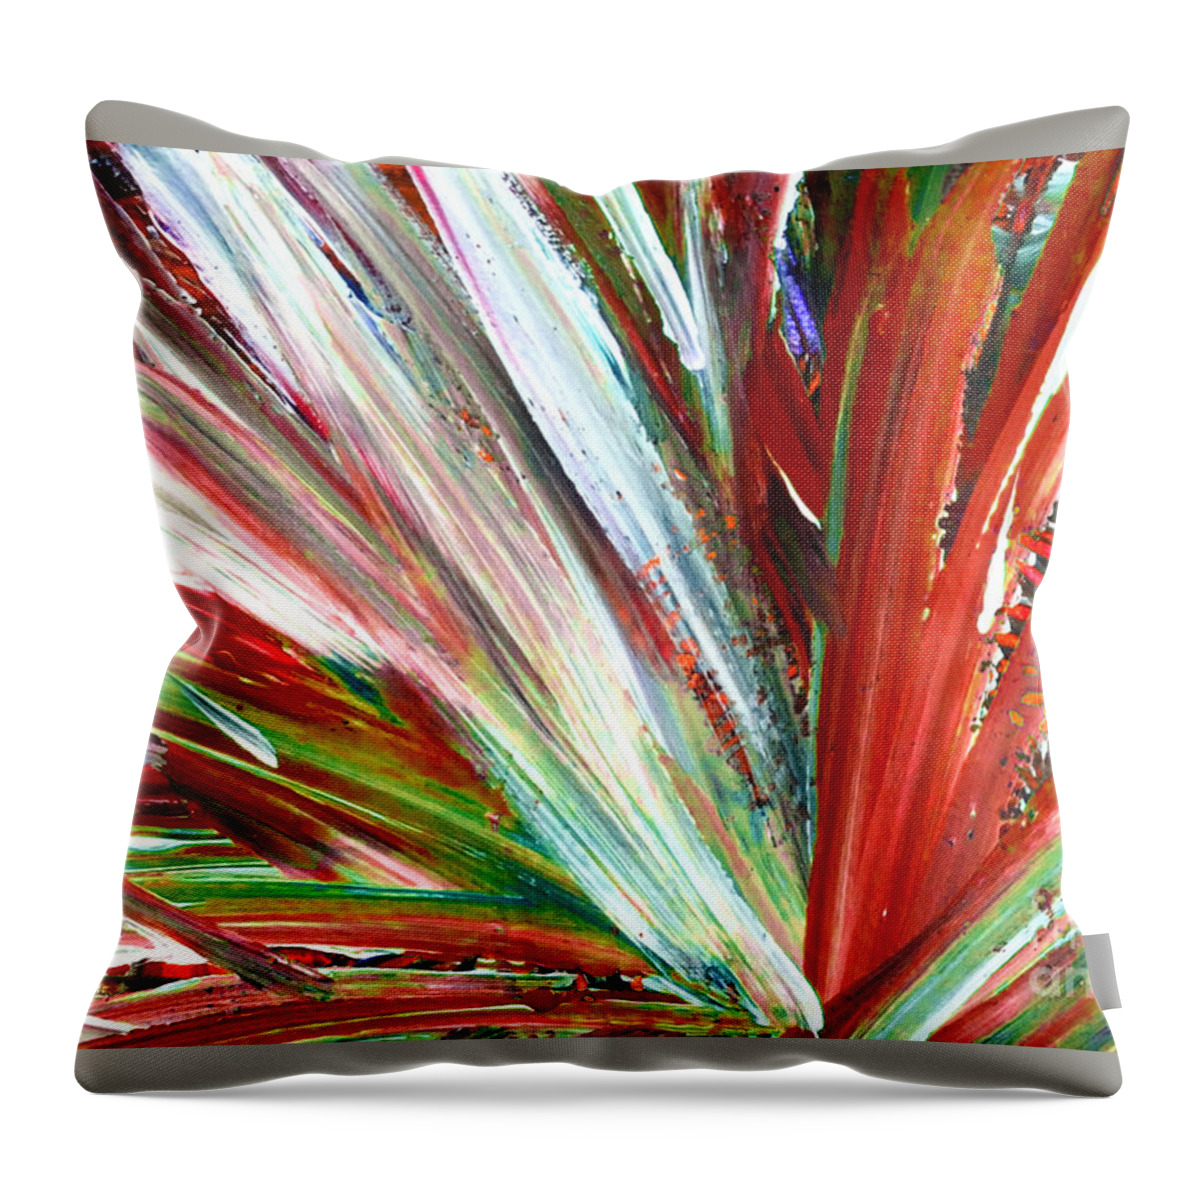 Abstract Throw Pillow featuring the painting Abstract Explosion Series 292215 by Mas Art Studio